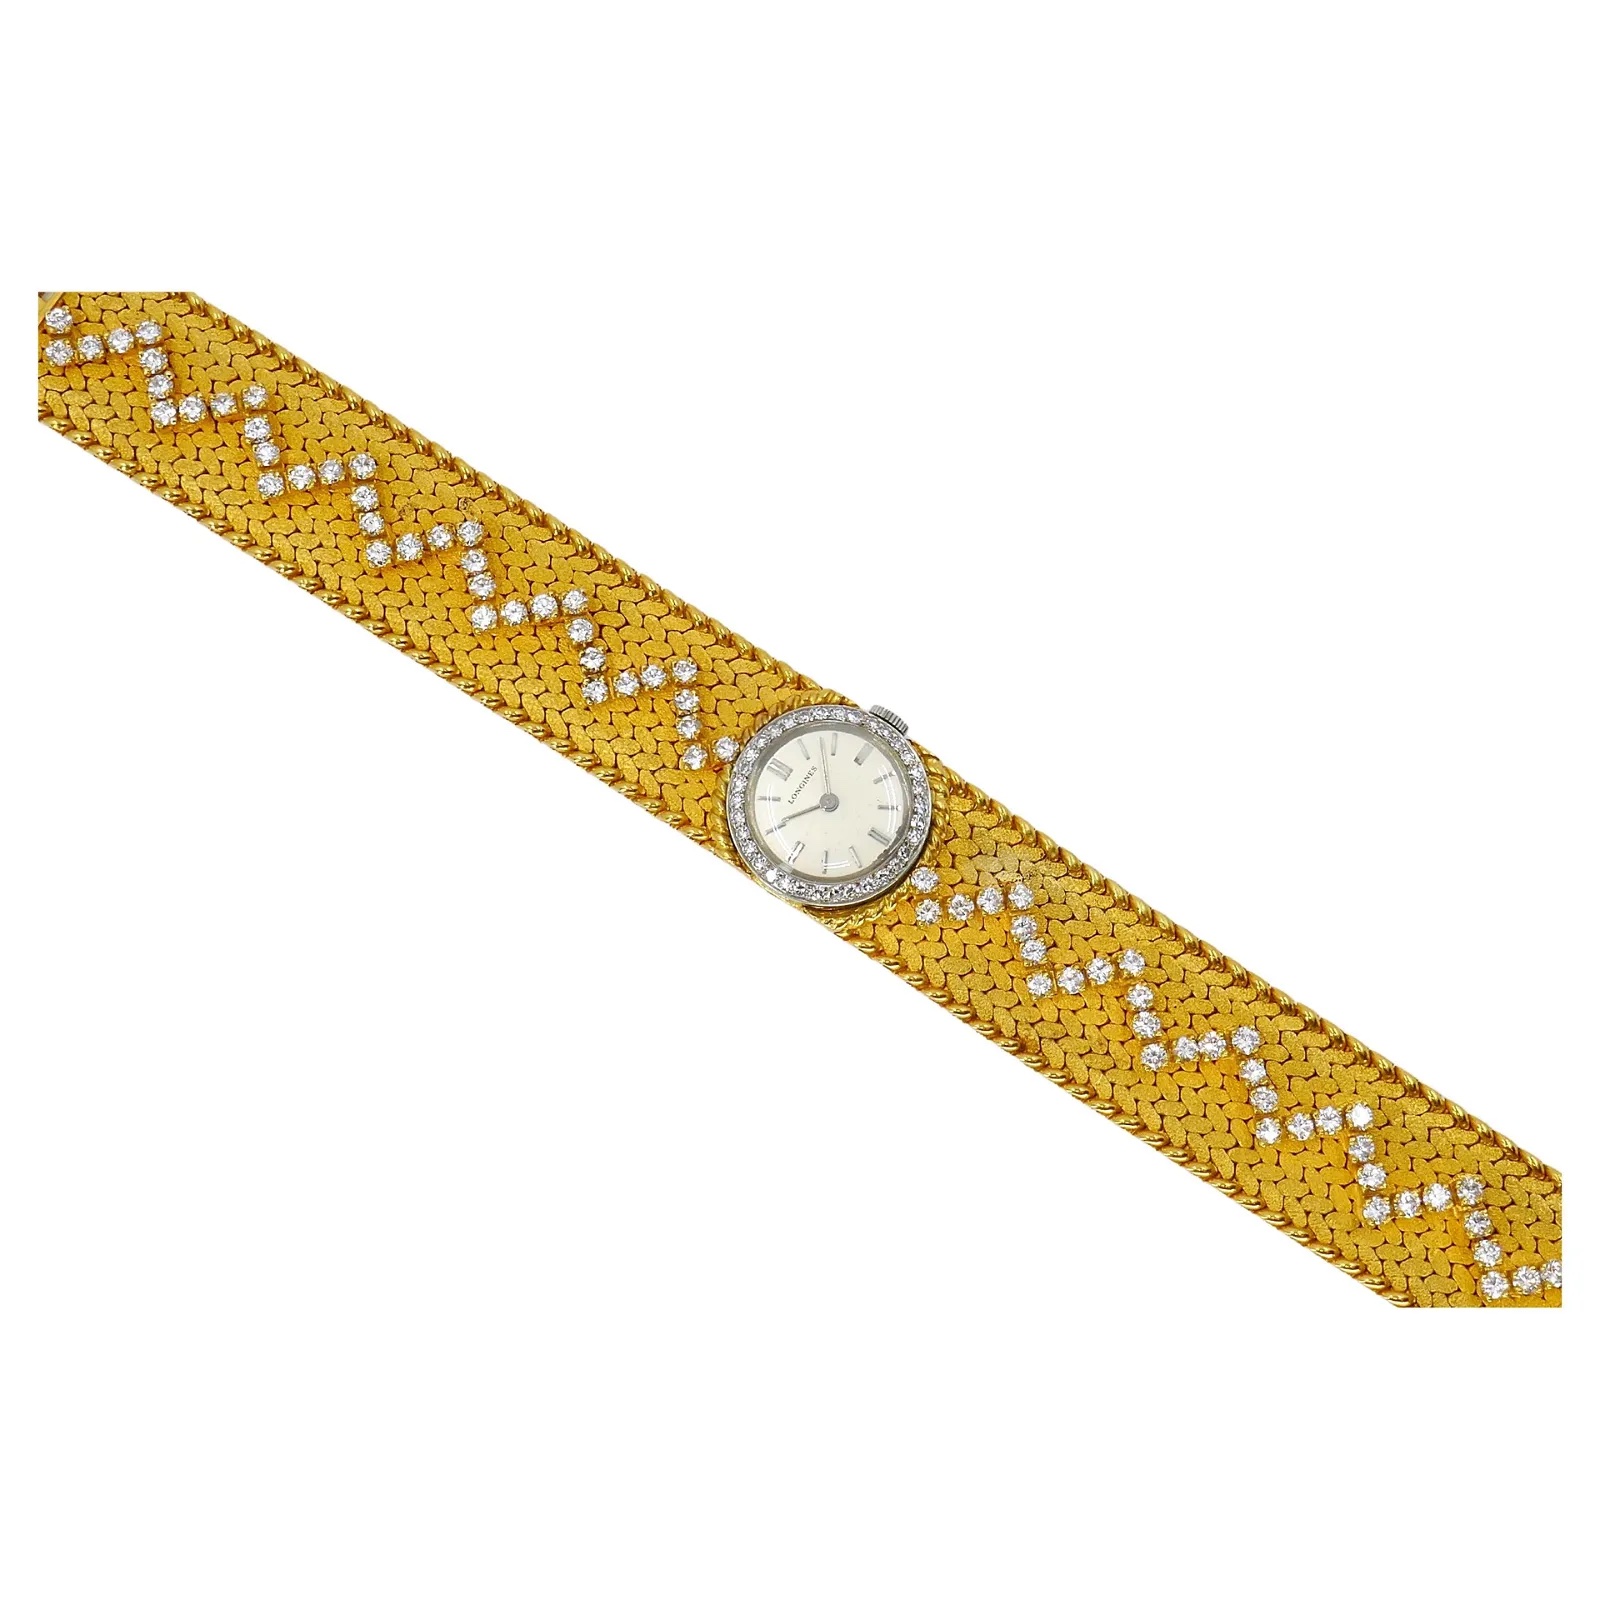 Vintage Cartier 18K gold and diamond braided watch, estimated at $24,000-$29,000 at Jasper52.
